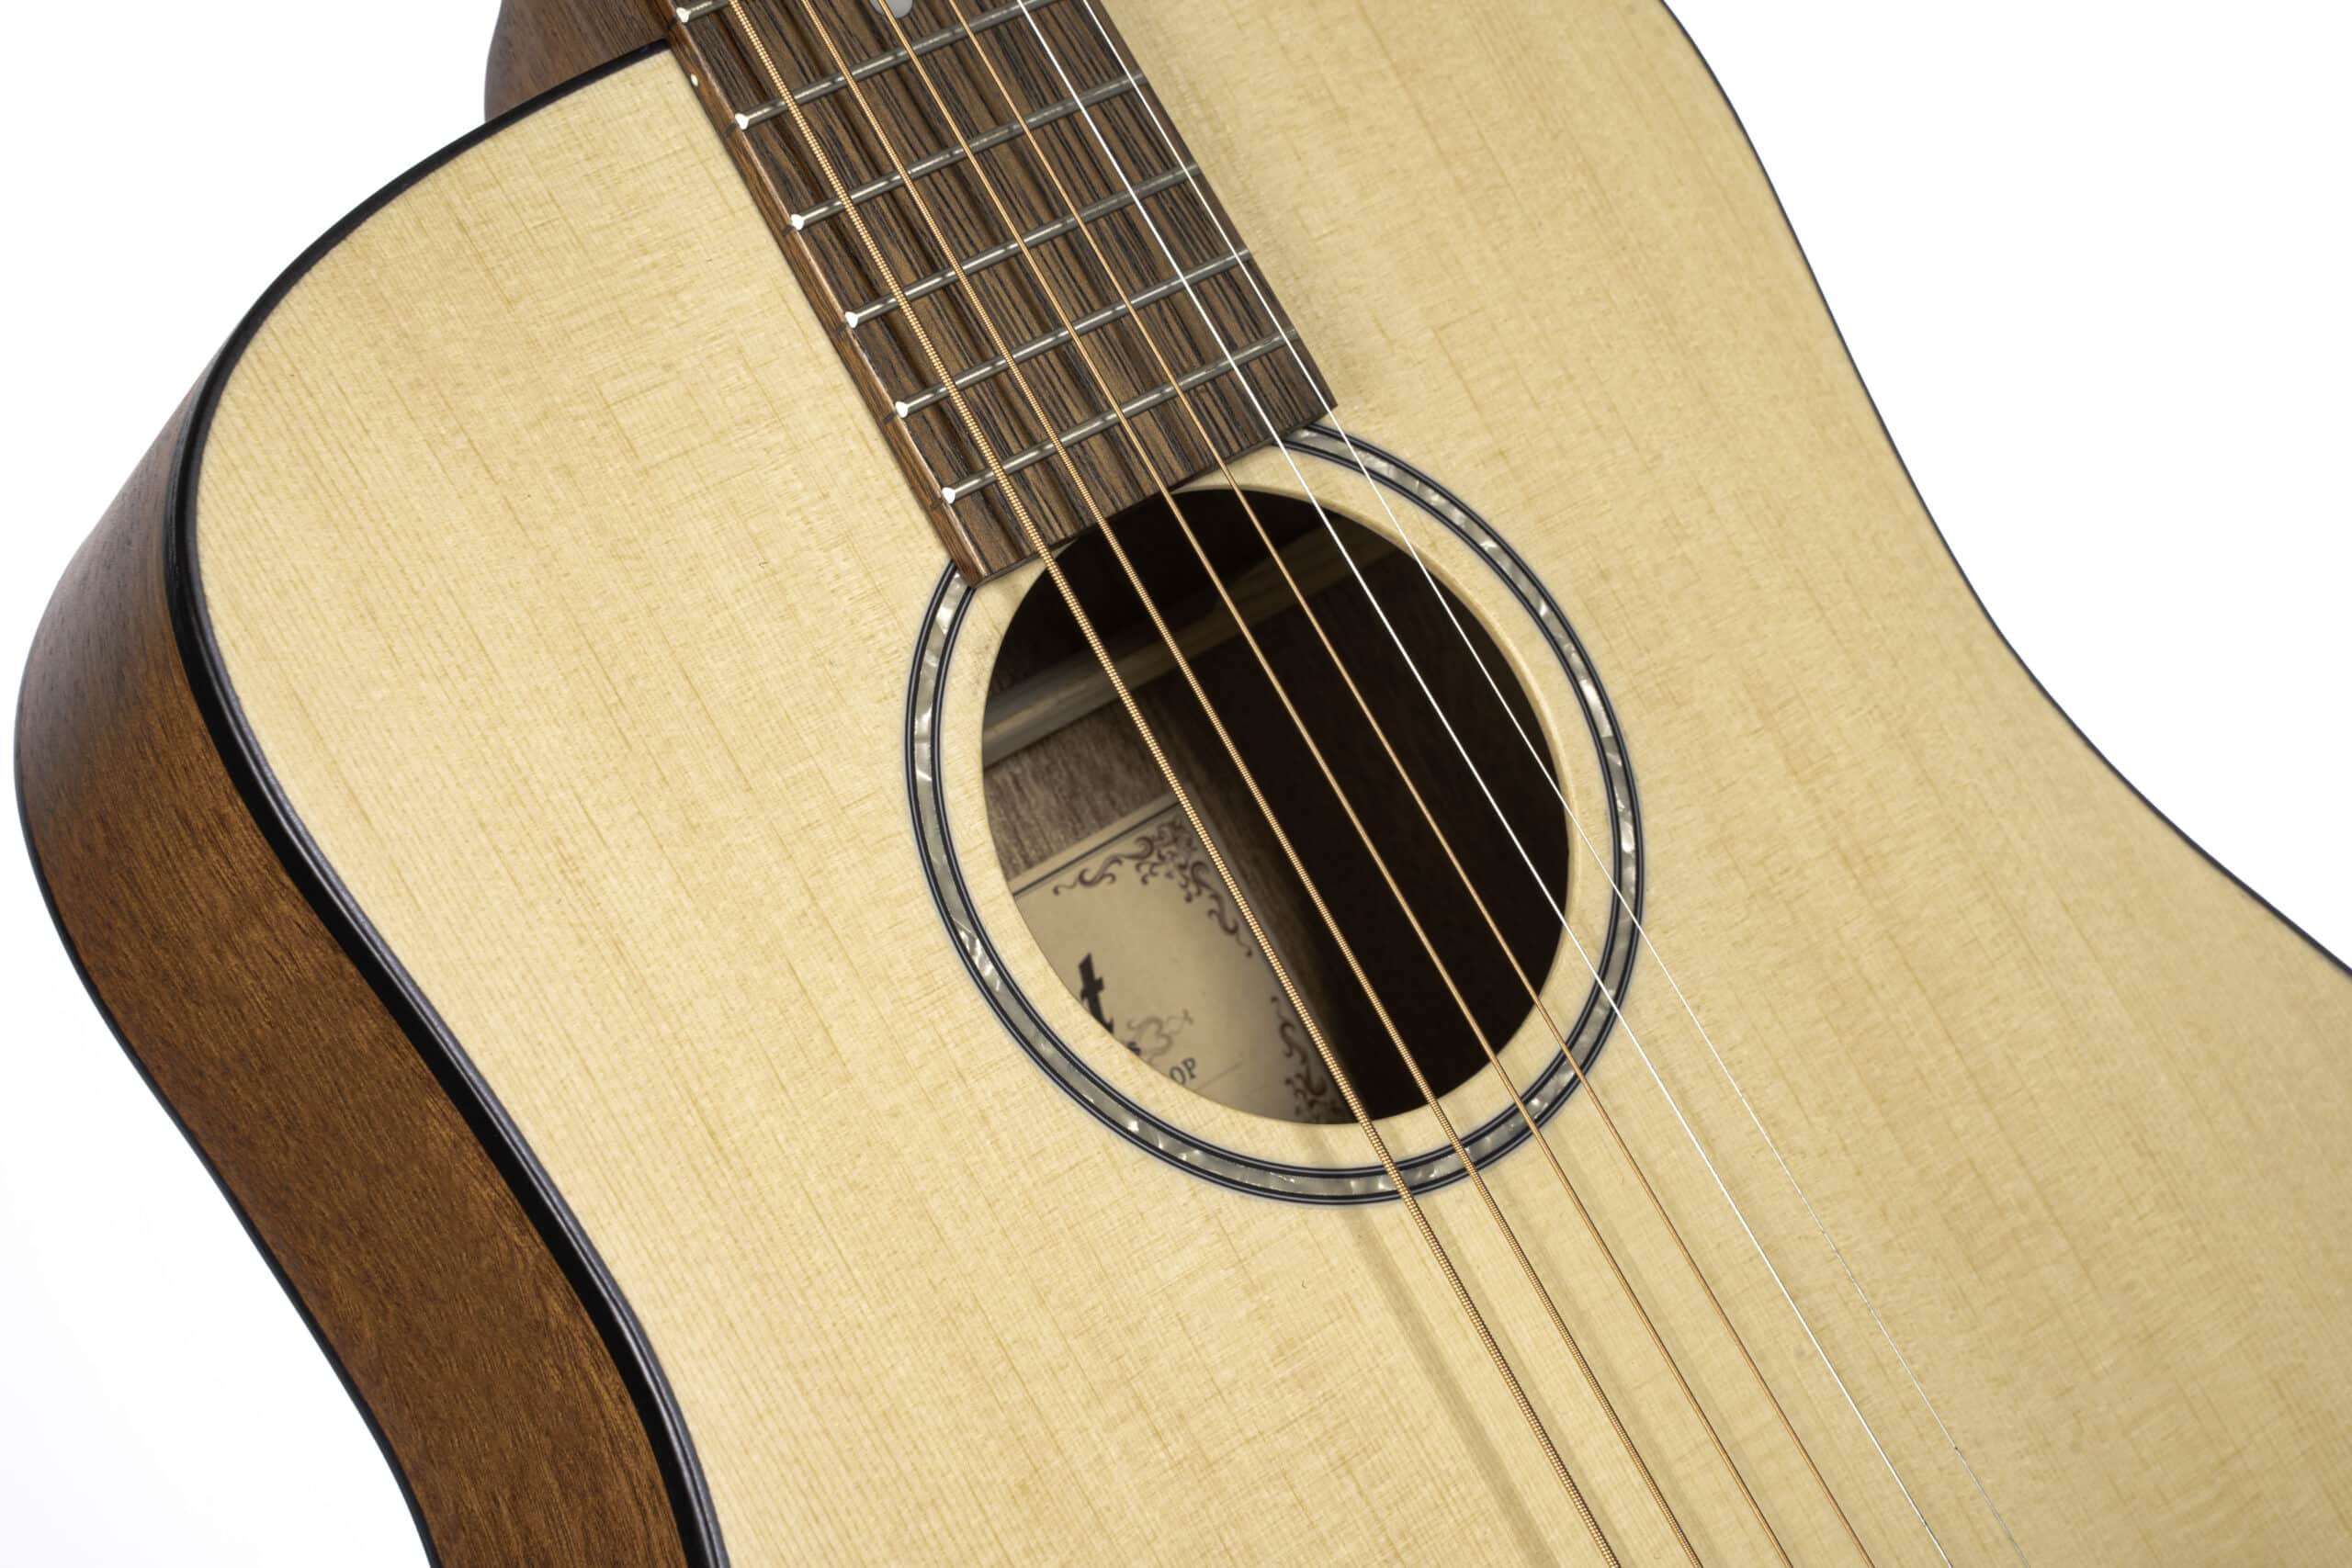 The Cort AD Series – Your First Steel String Acoustic Guitar